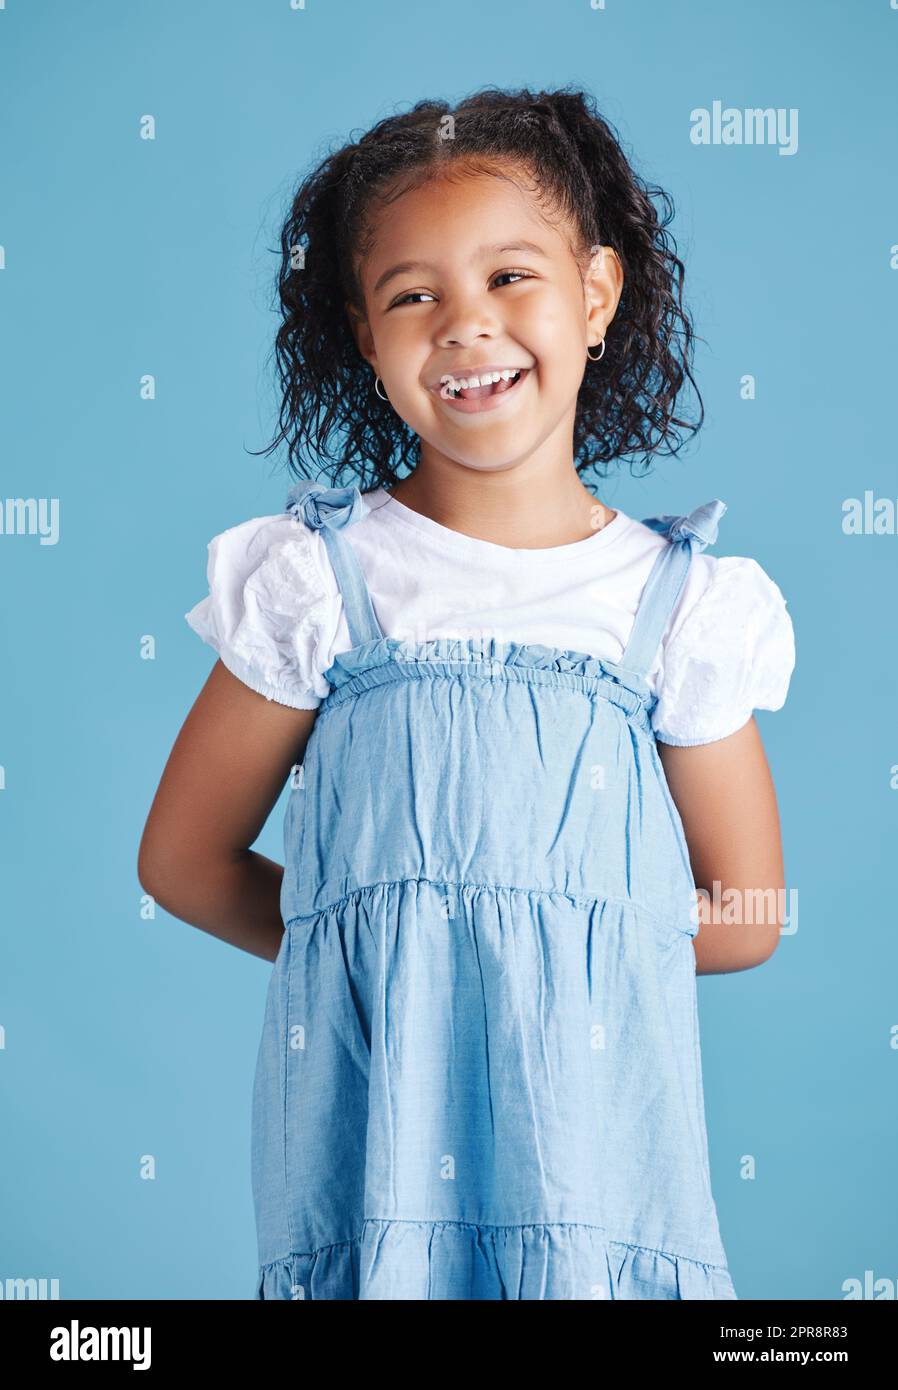 Happy smiling little girl standing with her hands behind her back against blue studio background. Cheerful mixed race kid in casual denim dress and white tshirt Stock Photo